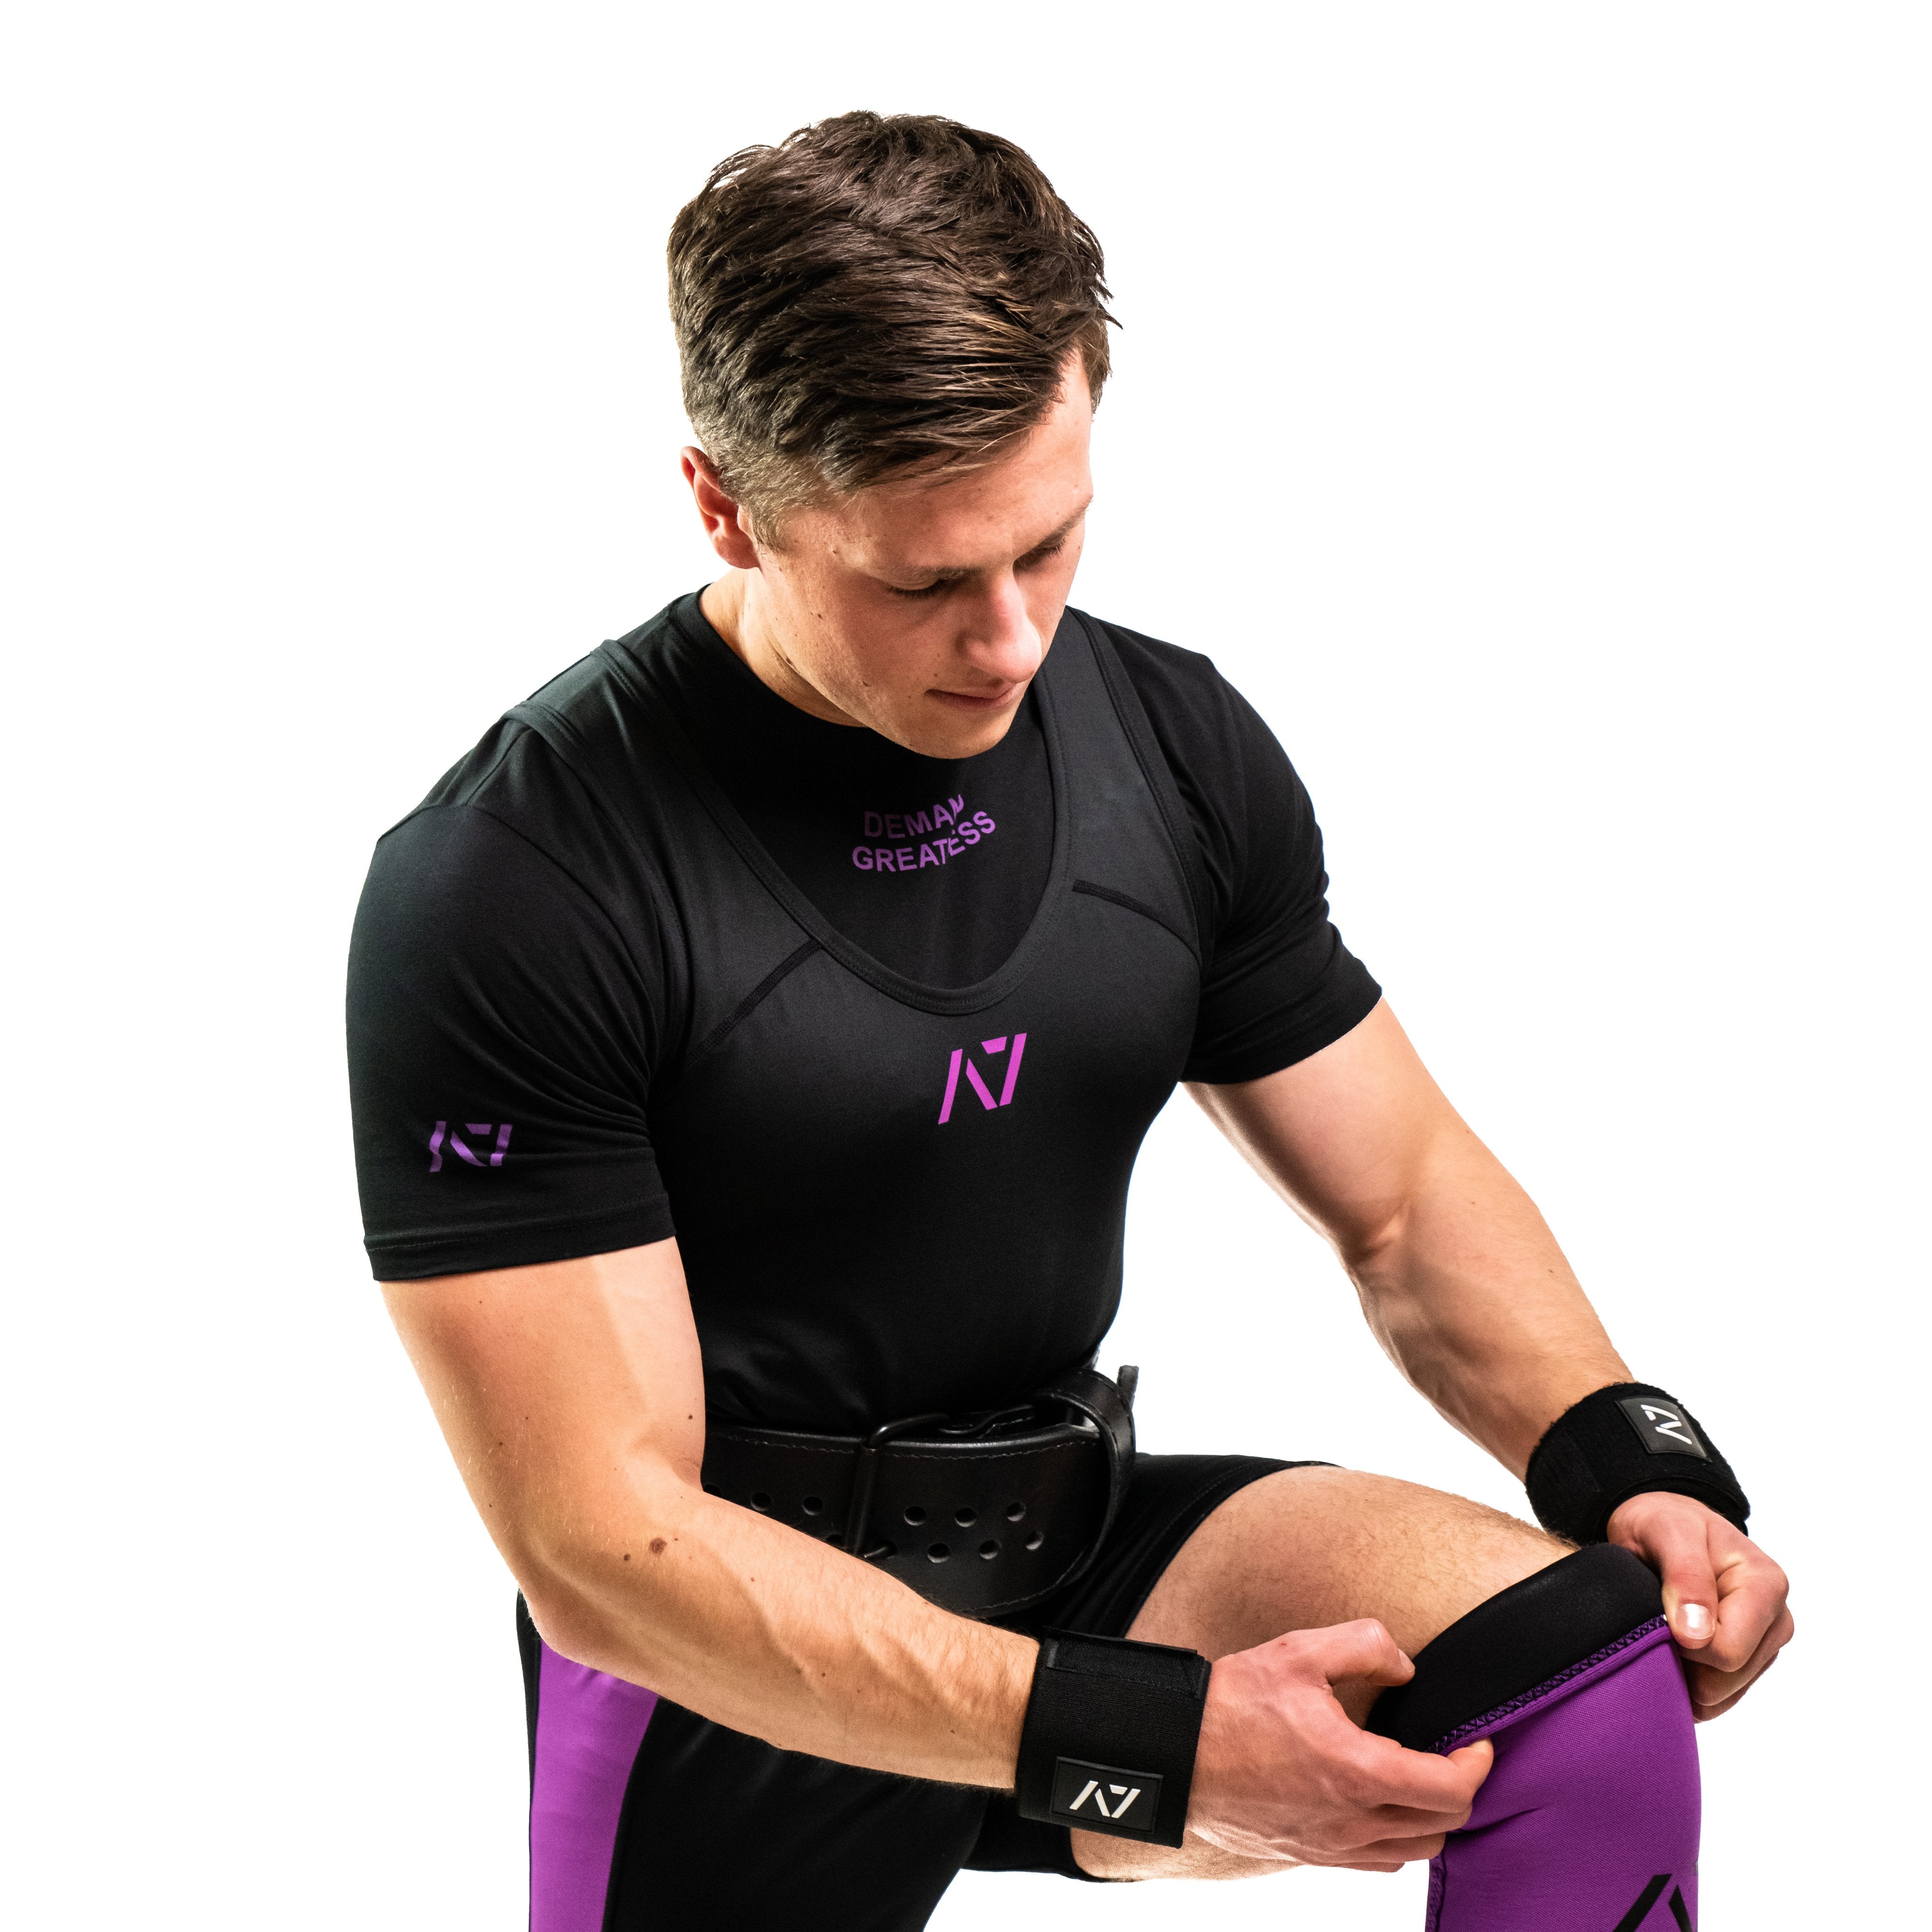 A7 IPF Approved Powerlifting Singlet is designed exclusively for powerlifting. It is very comfortable to wear and feels soft on bare skin. A7 Powerlifting Singlet is made from breathable fabric and provides compression during your lifts. The perfect piece of IPF Approved Kit! A7 UK shipping to UK and Europe..